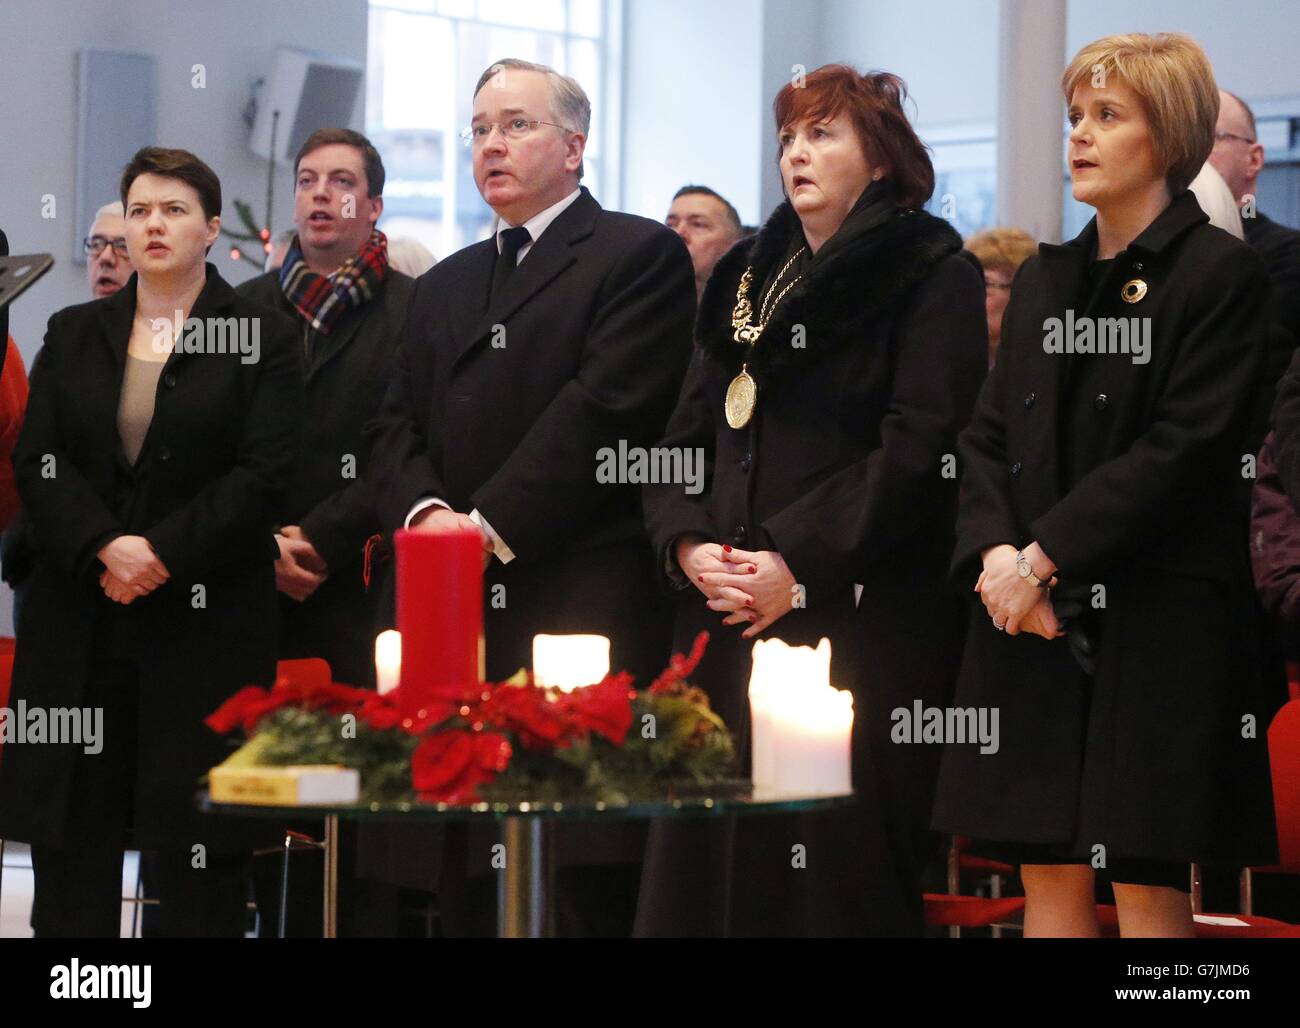 (Left to right) Leader of the Scottish Conservatives Ruth Davidson, Gordon Matheson, Glasgow Lord Provost Sadie Docherty and First Minister Nicola Sturgeon during a service of remembrance at St George's Tron Church of Scotland in Glasgow, after a bin lorry crashed into a group of pedestrians which left six people dead. Stock Photo